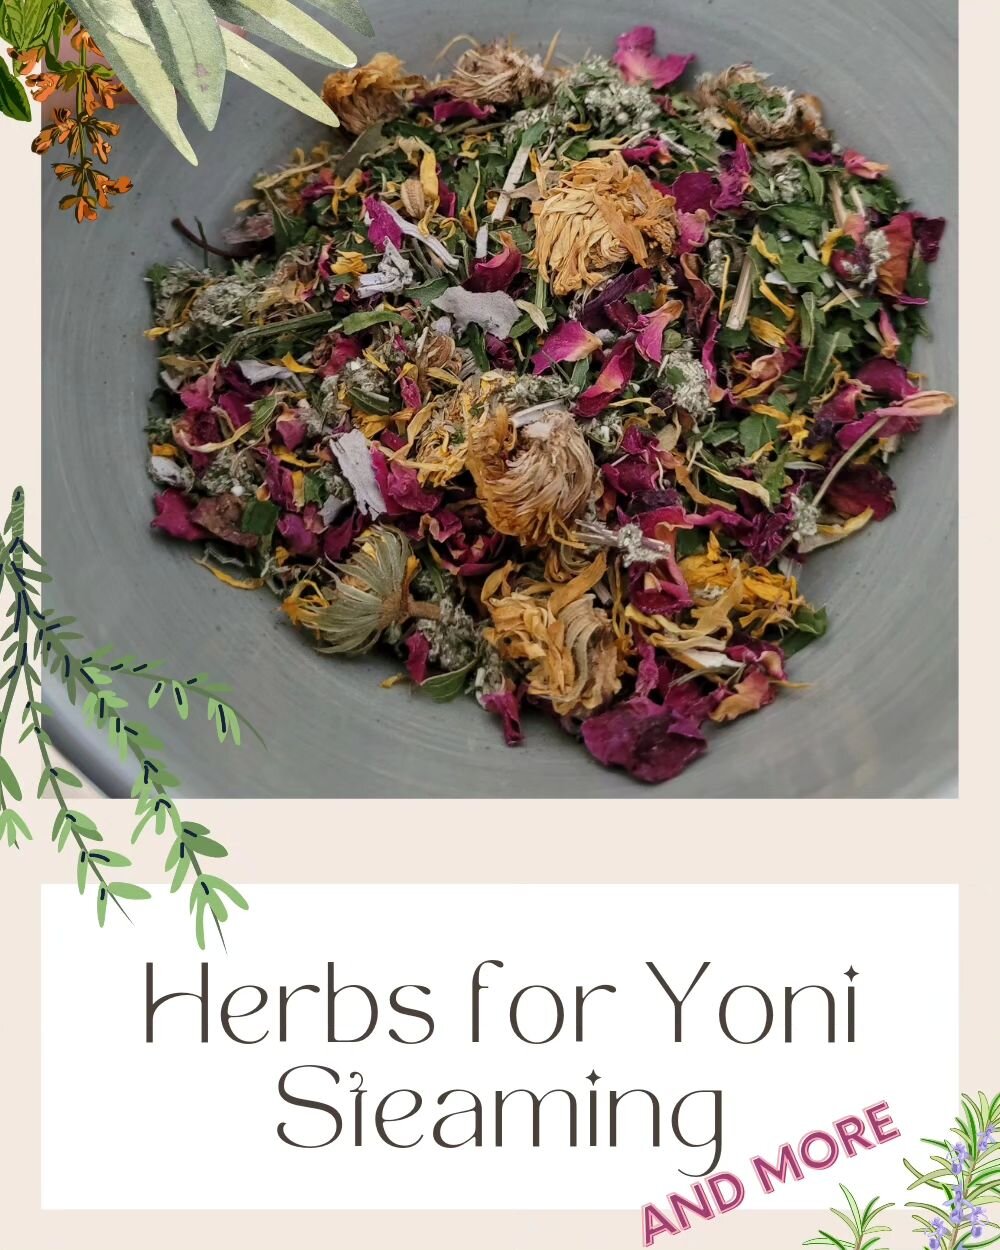 Many of the herbs used in vaginal steaming can also be used in teas,baths, in food and in spiritual and ritual work!

My most popular blog post outlines my top herbs and different ways they are used. Take a read!
Link in bio.

What are your favorite 